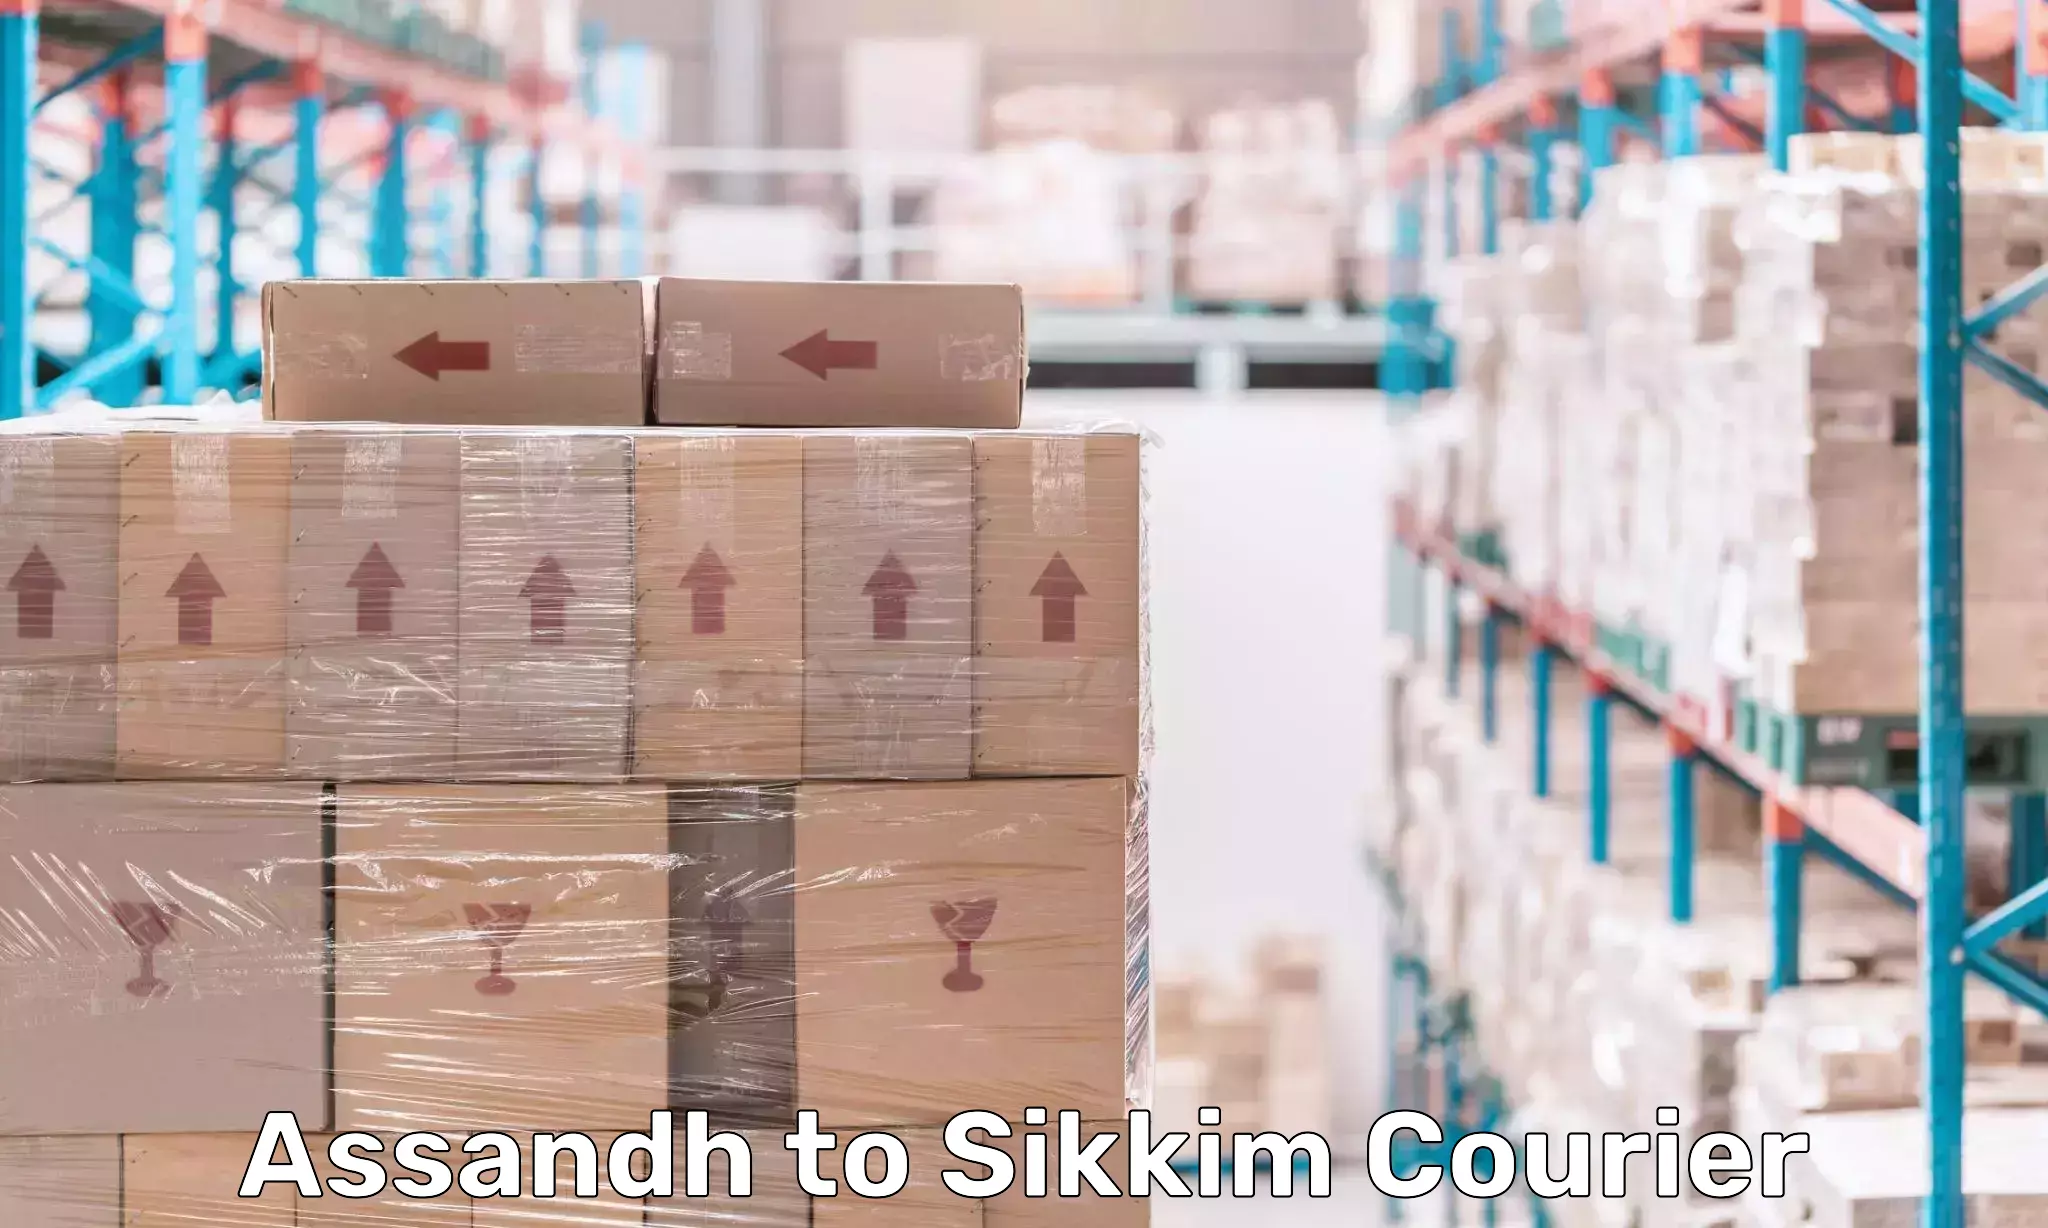 Supply chain efficiency Assandh to South Sikkim